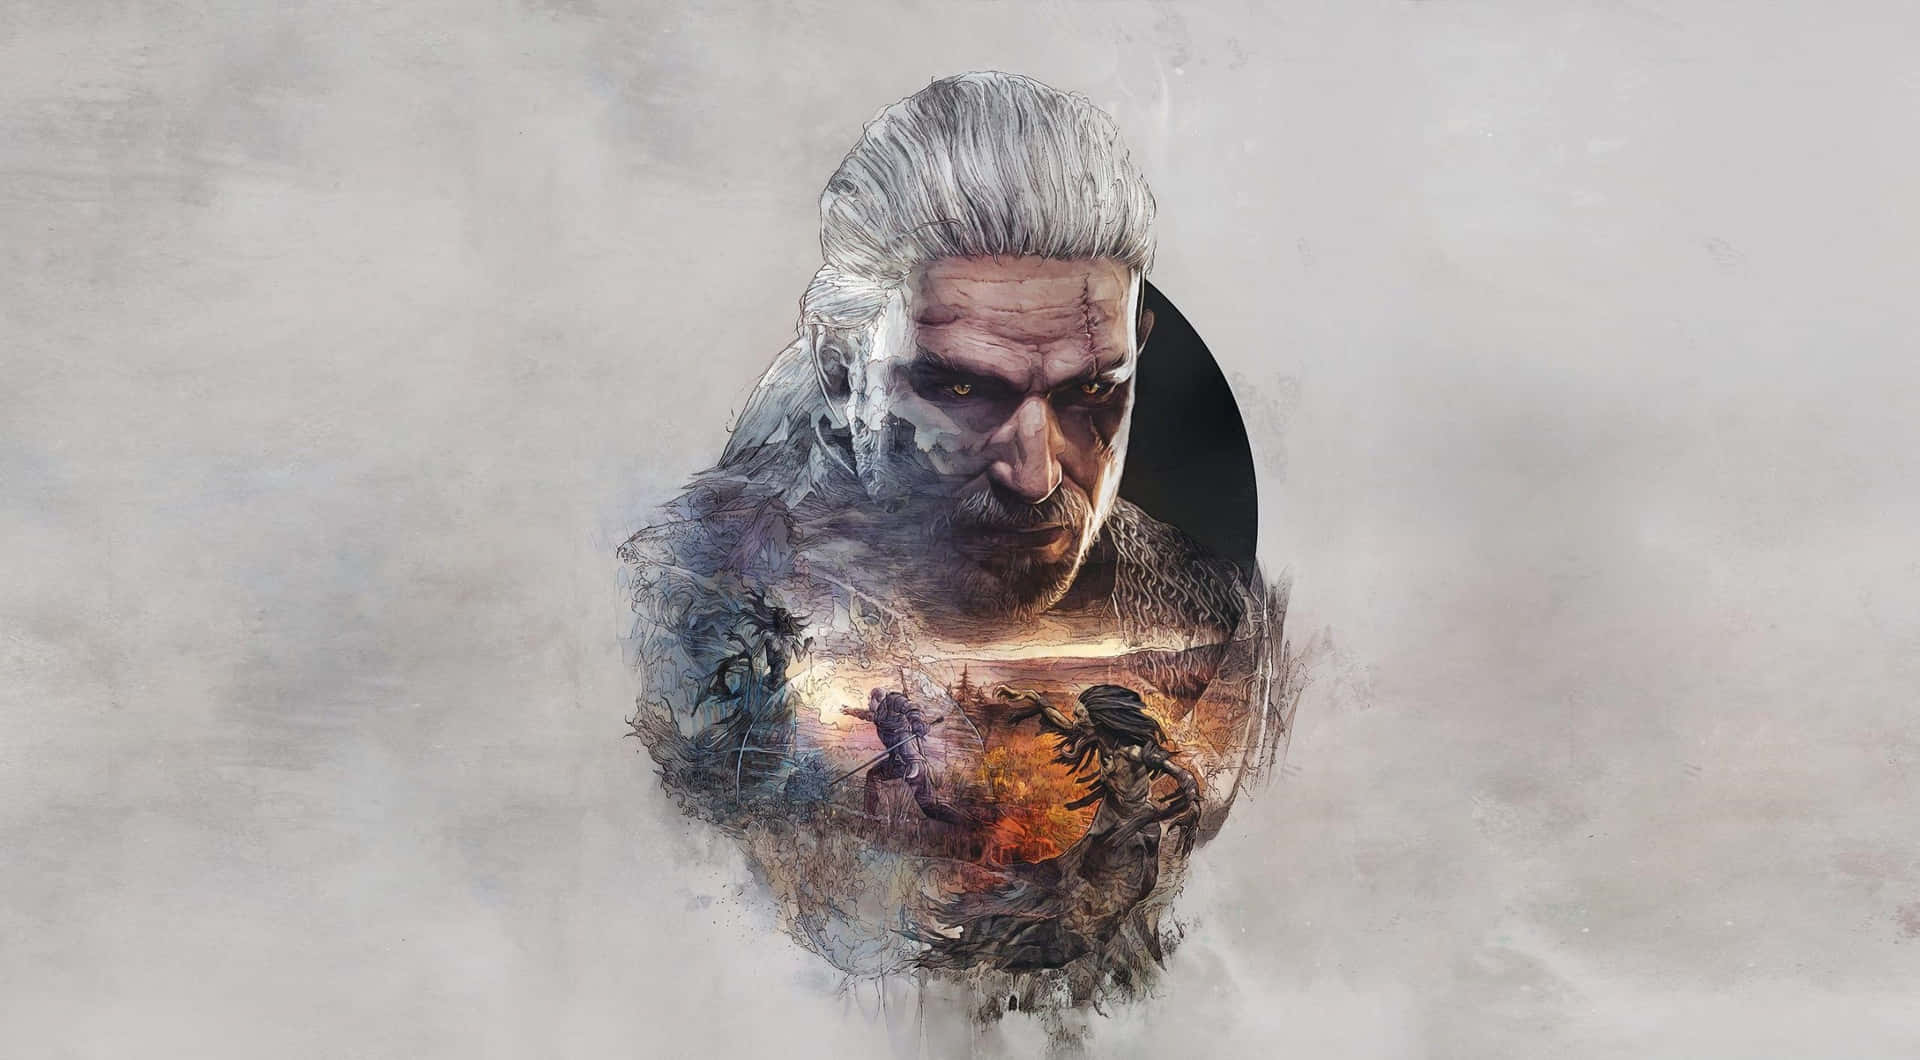 Immerse Yourself in the Fantasy Adventure with The Witcher 3 Wild Hunt Wallpaper